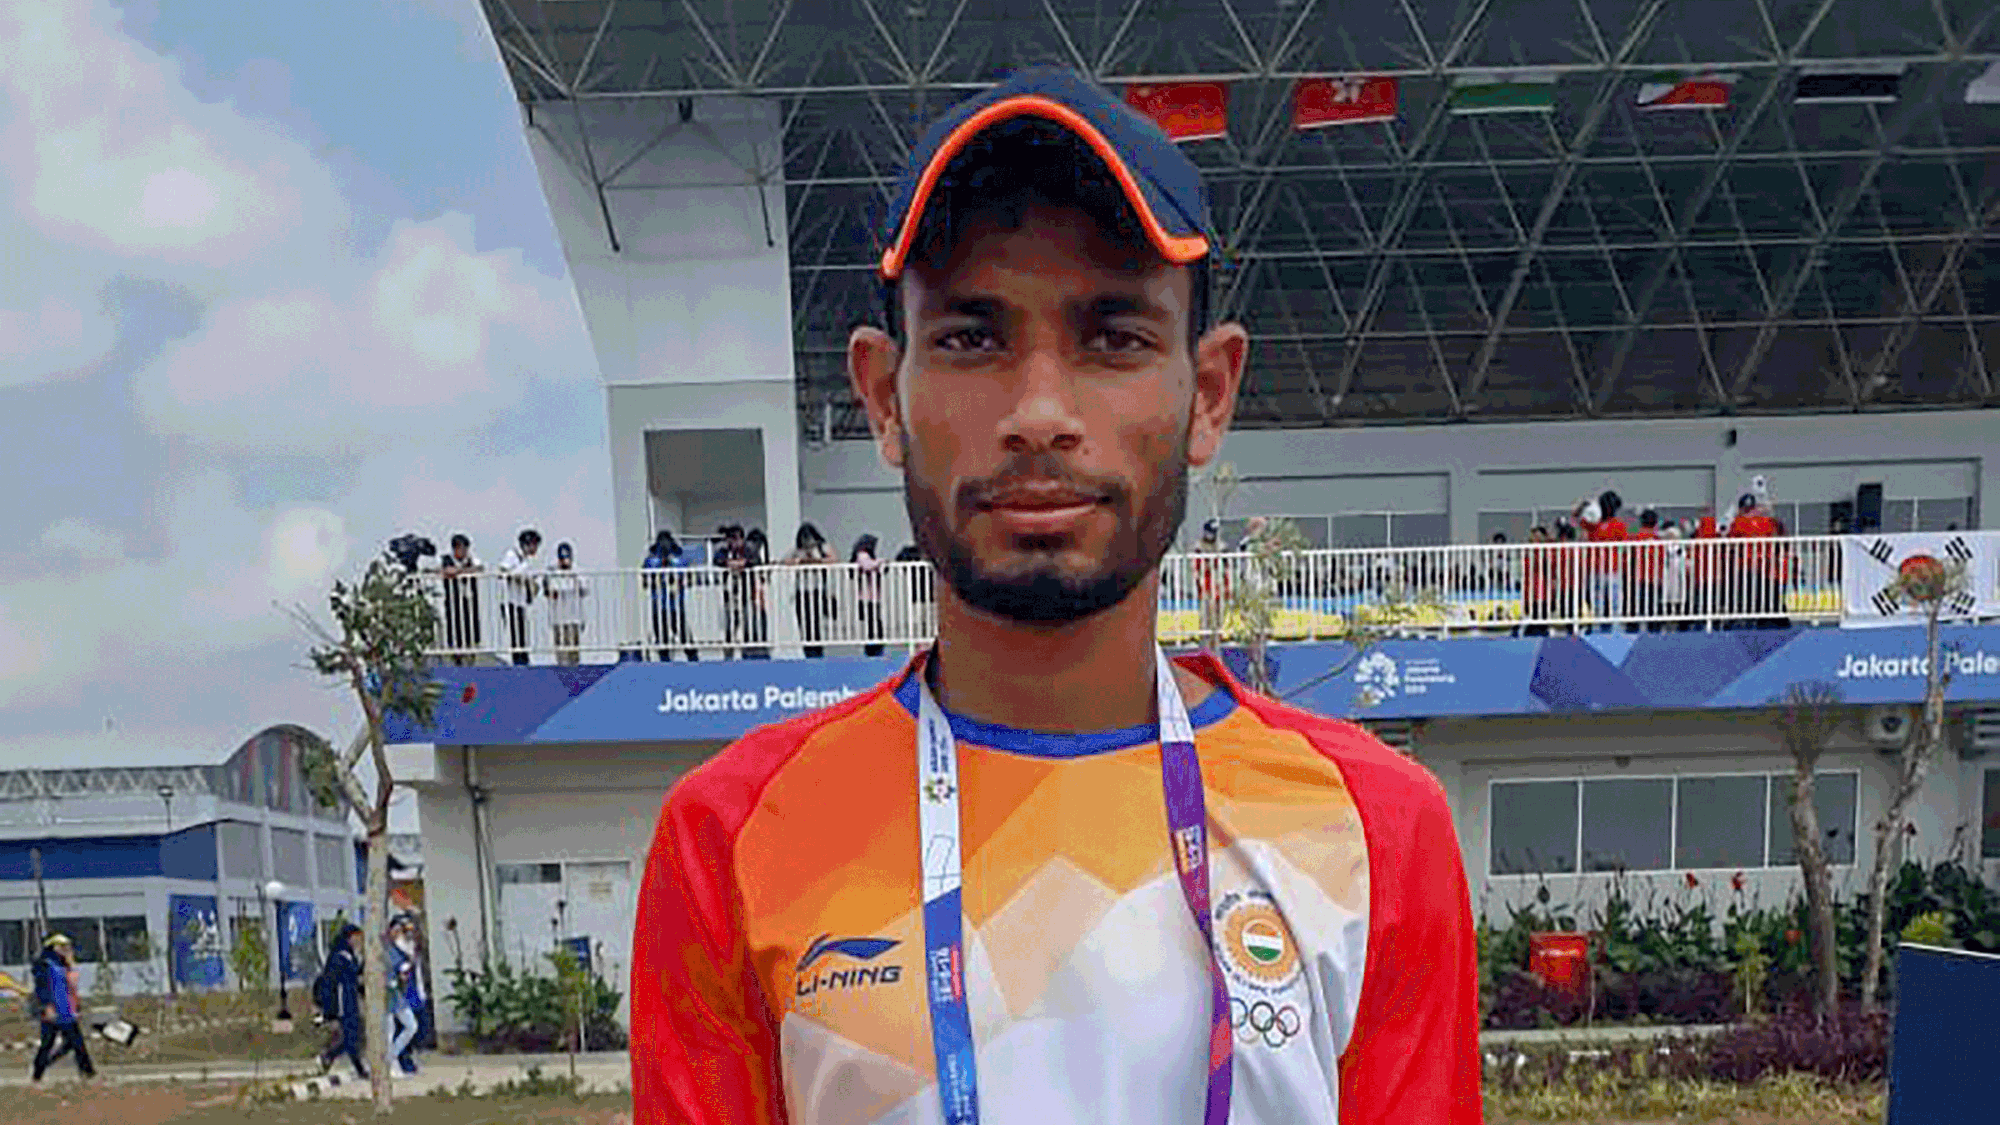 Rower Bhagwan Singh revealed that he quit pursuing journalism and took up rowing in 2012.